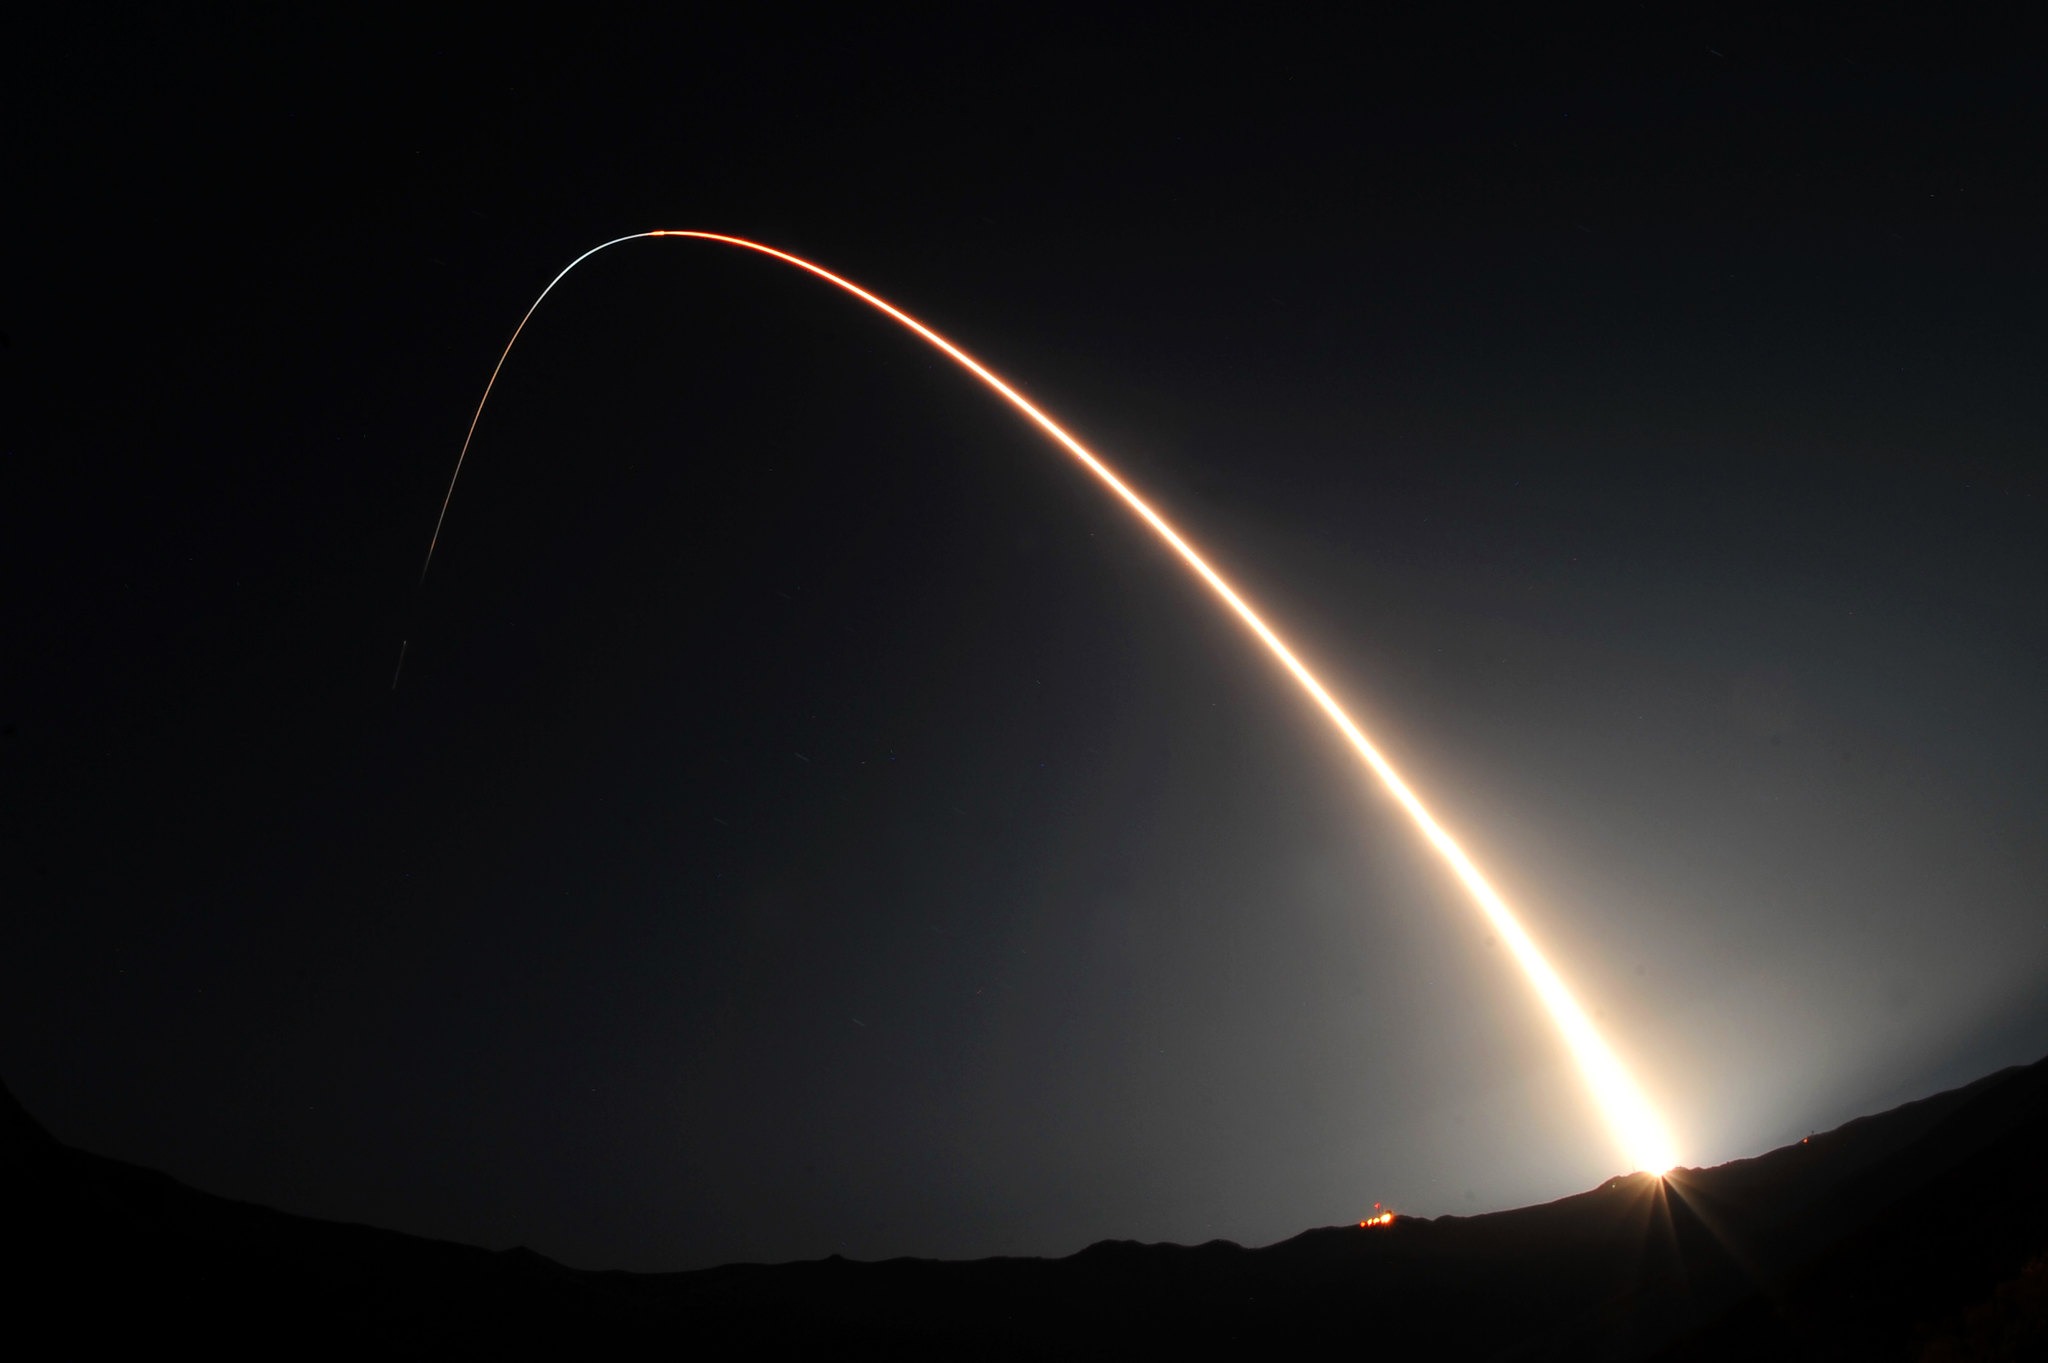 Is Weaponization of Space a Reality? Taking Stock of the Outer Space Treaty